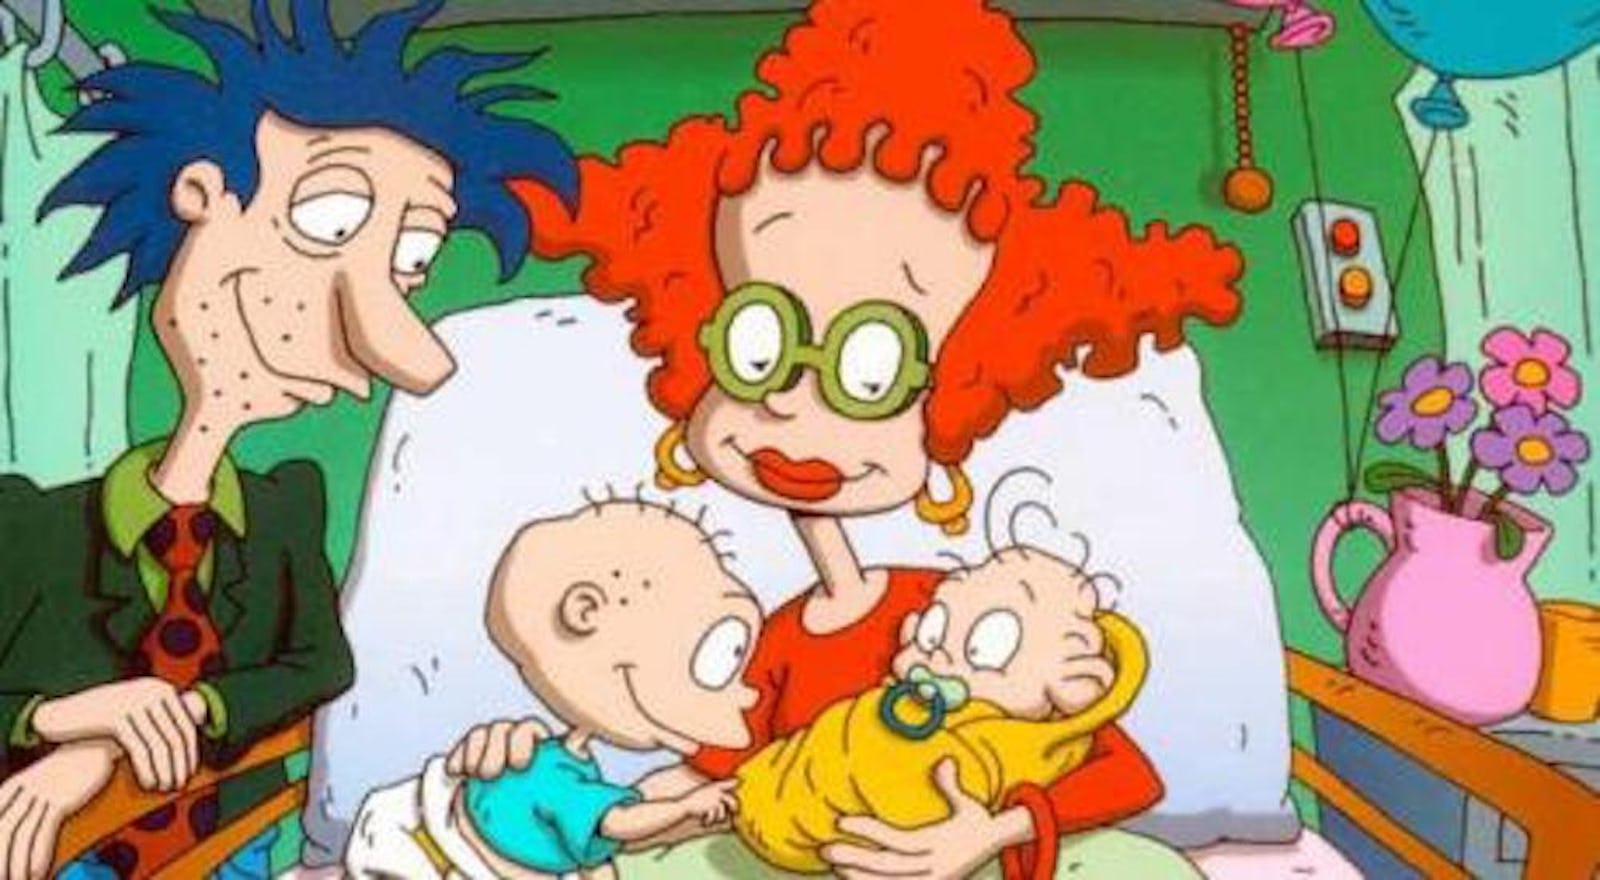 Didi Pickles From Rugrats Was Way Ahead Of Her Time According To